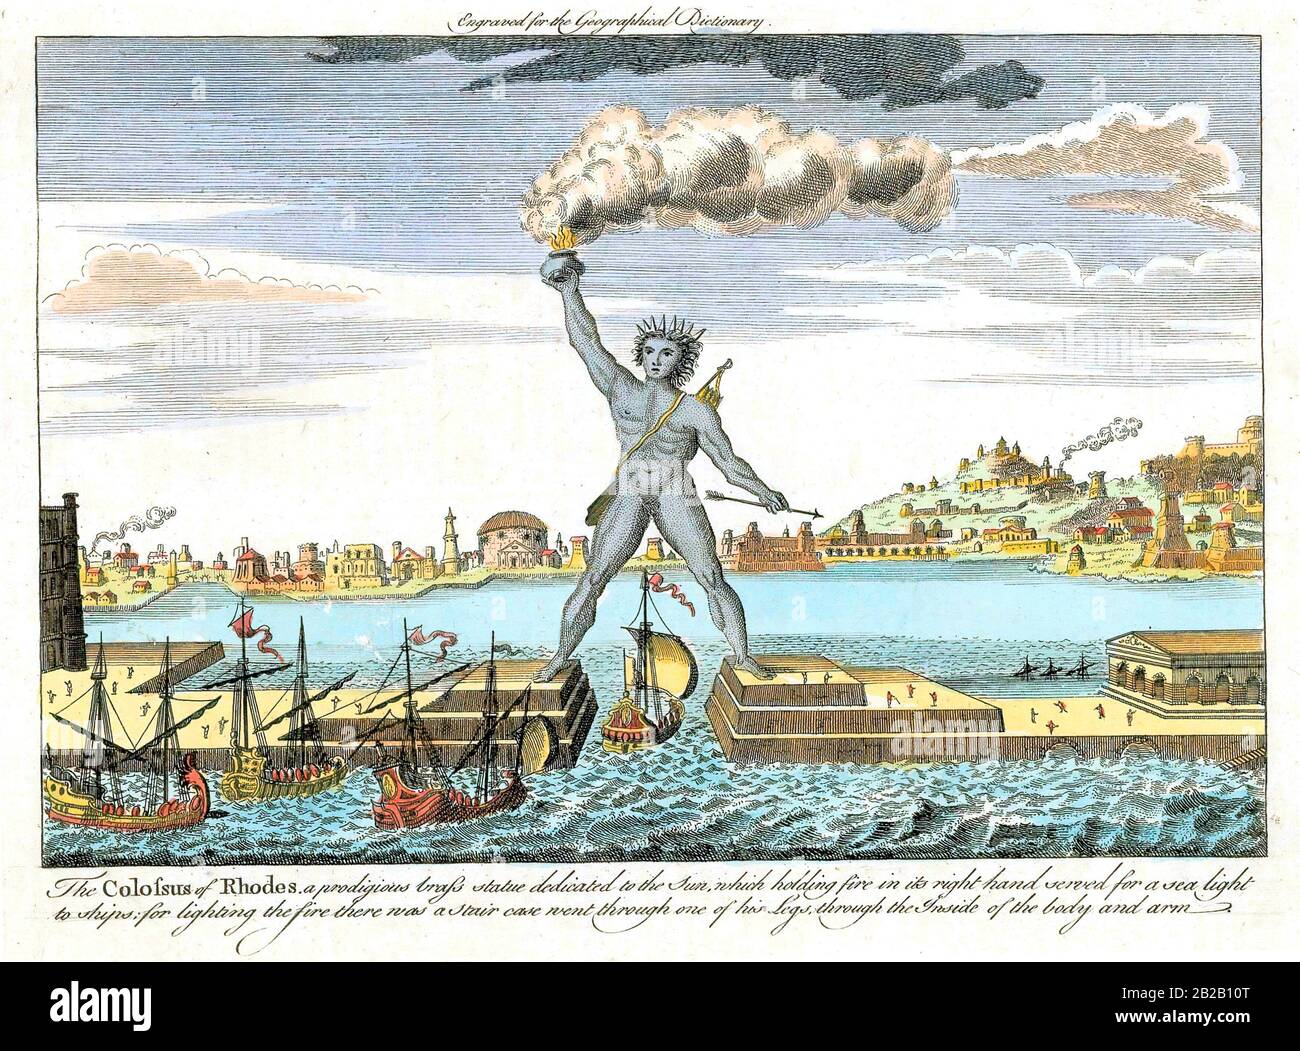 The Colossus of Rhodes, one of the Seven Wonders of the Ancient World. Engraved for the New Geographical Dictionary, 18th Century. Stock Photo